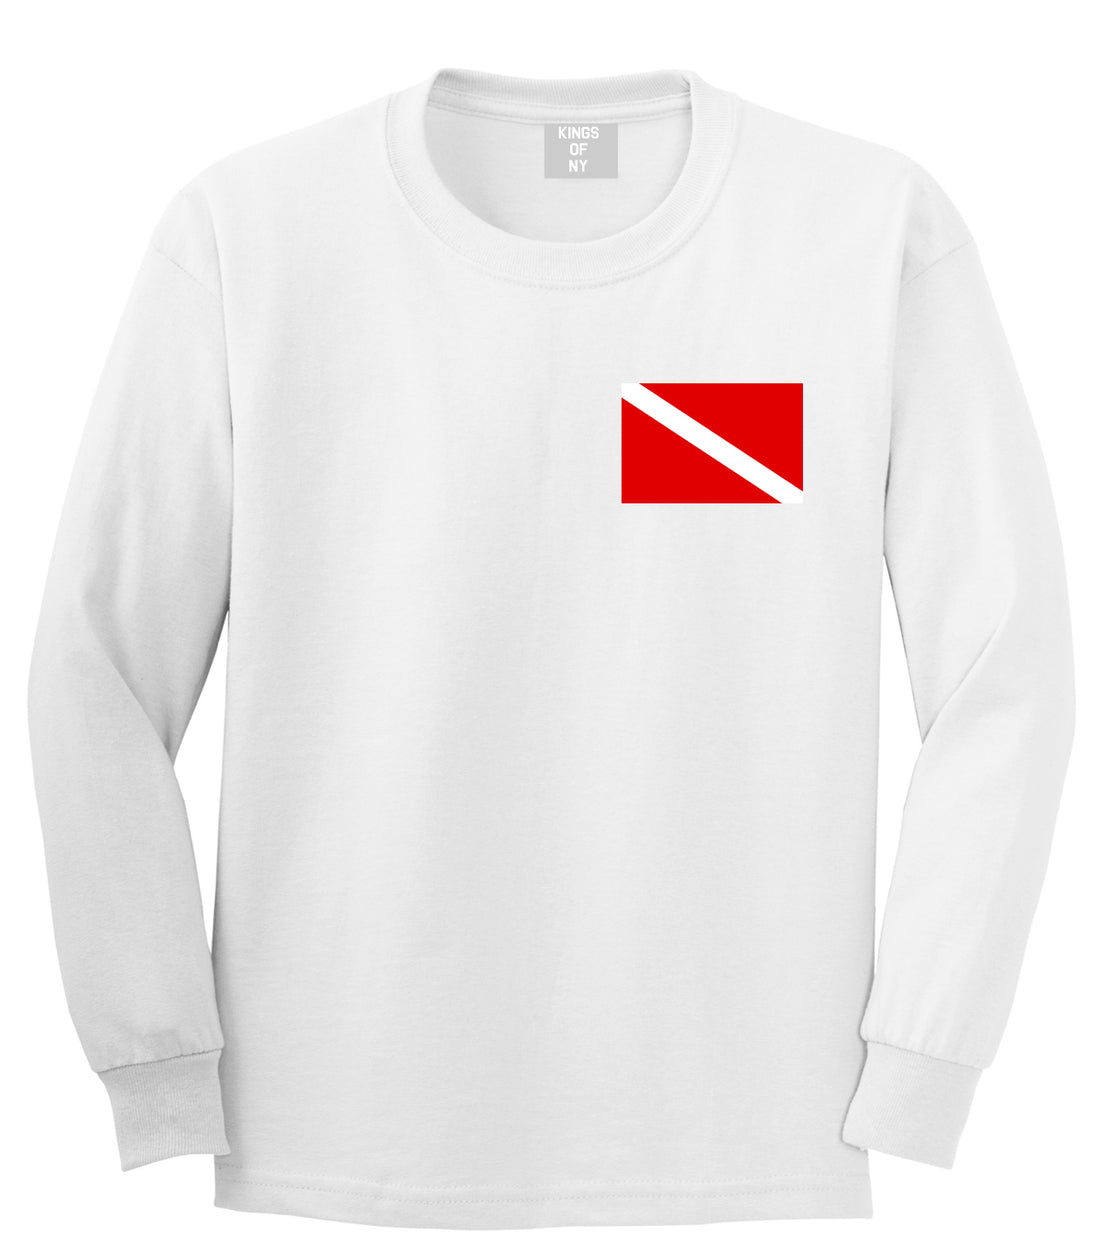 Scuba Dive Flag Chest Mens White Long Sleeve T-Shirt by Kings Of NY